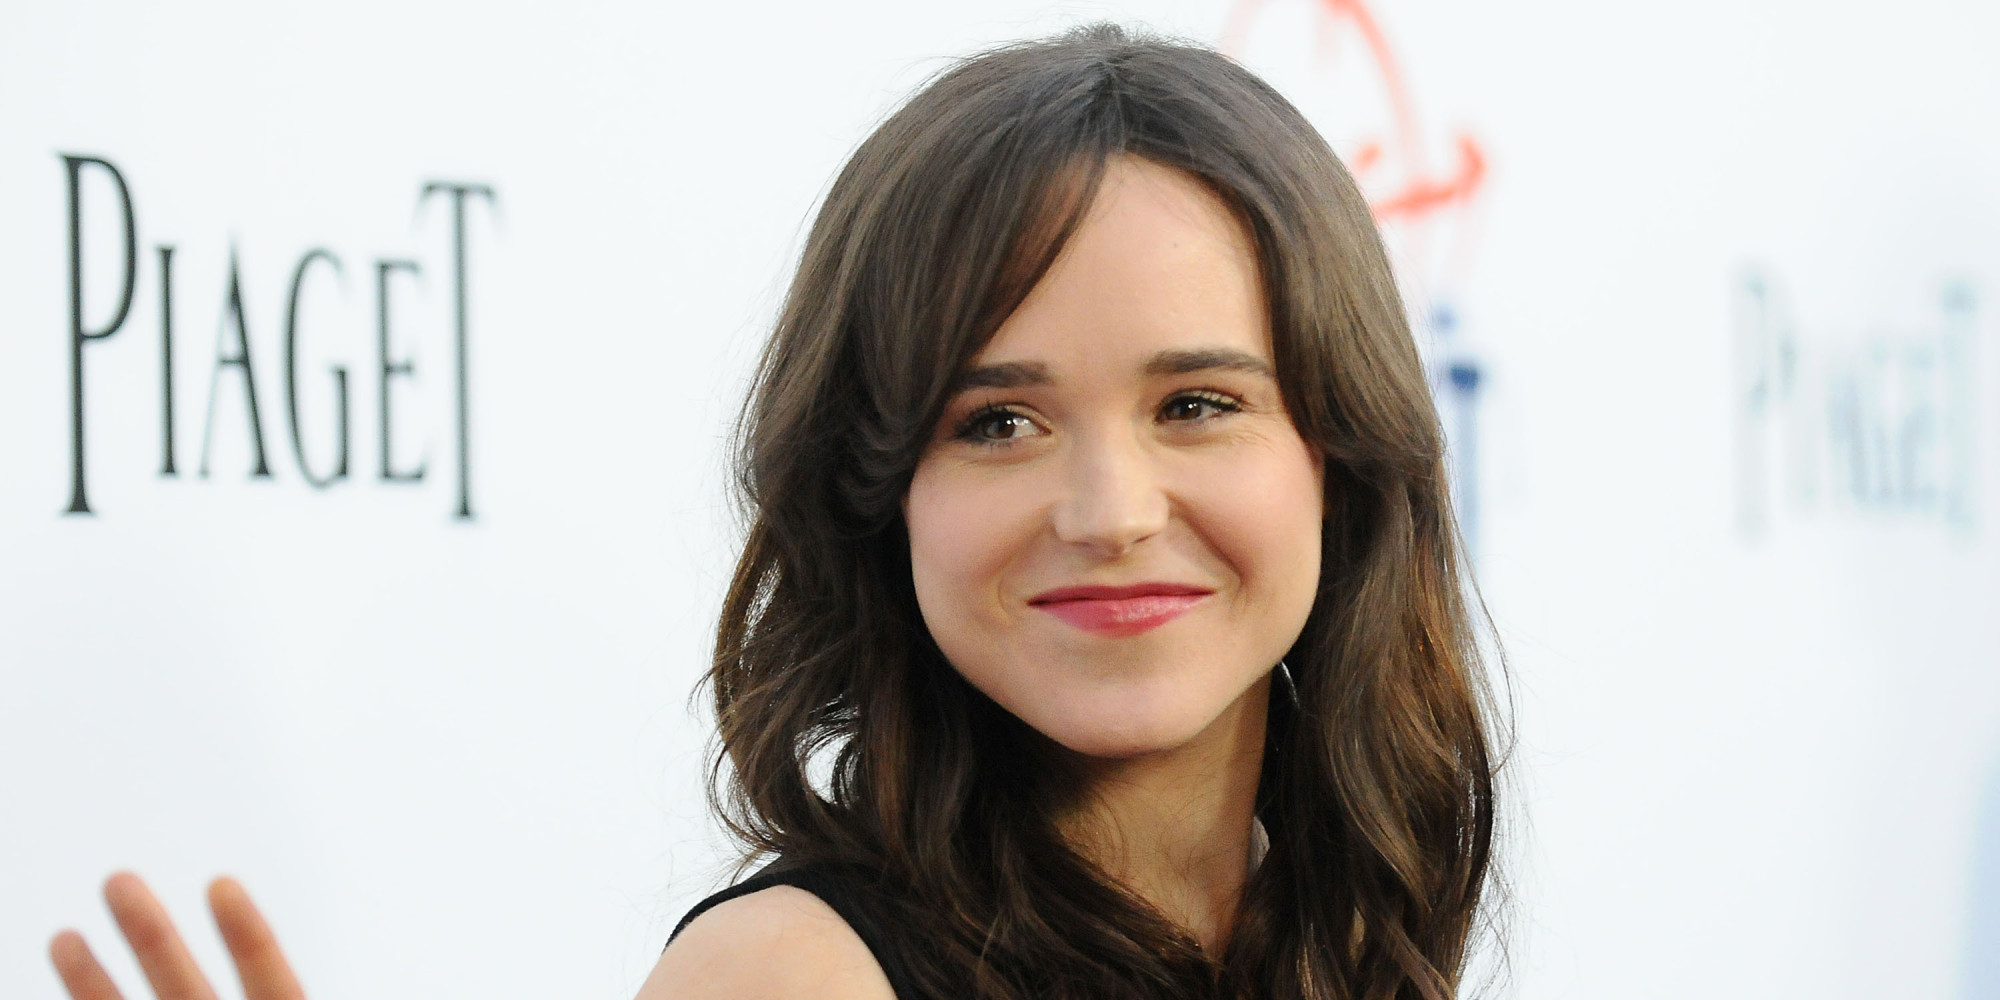 Ellen Page Video Game Nudes Prompt Action From Sony